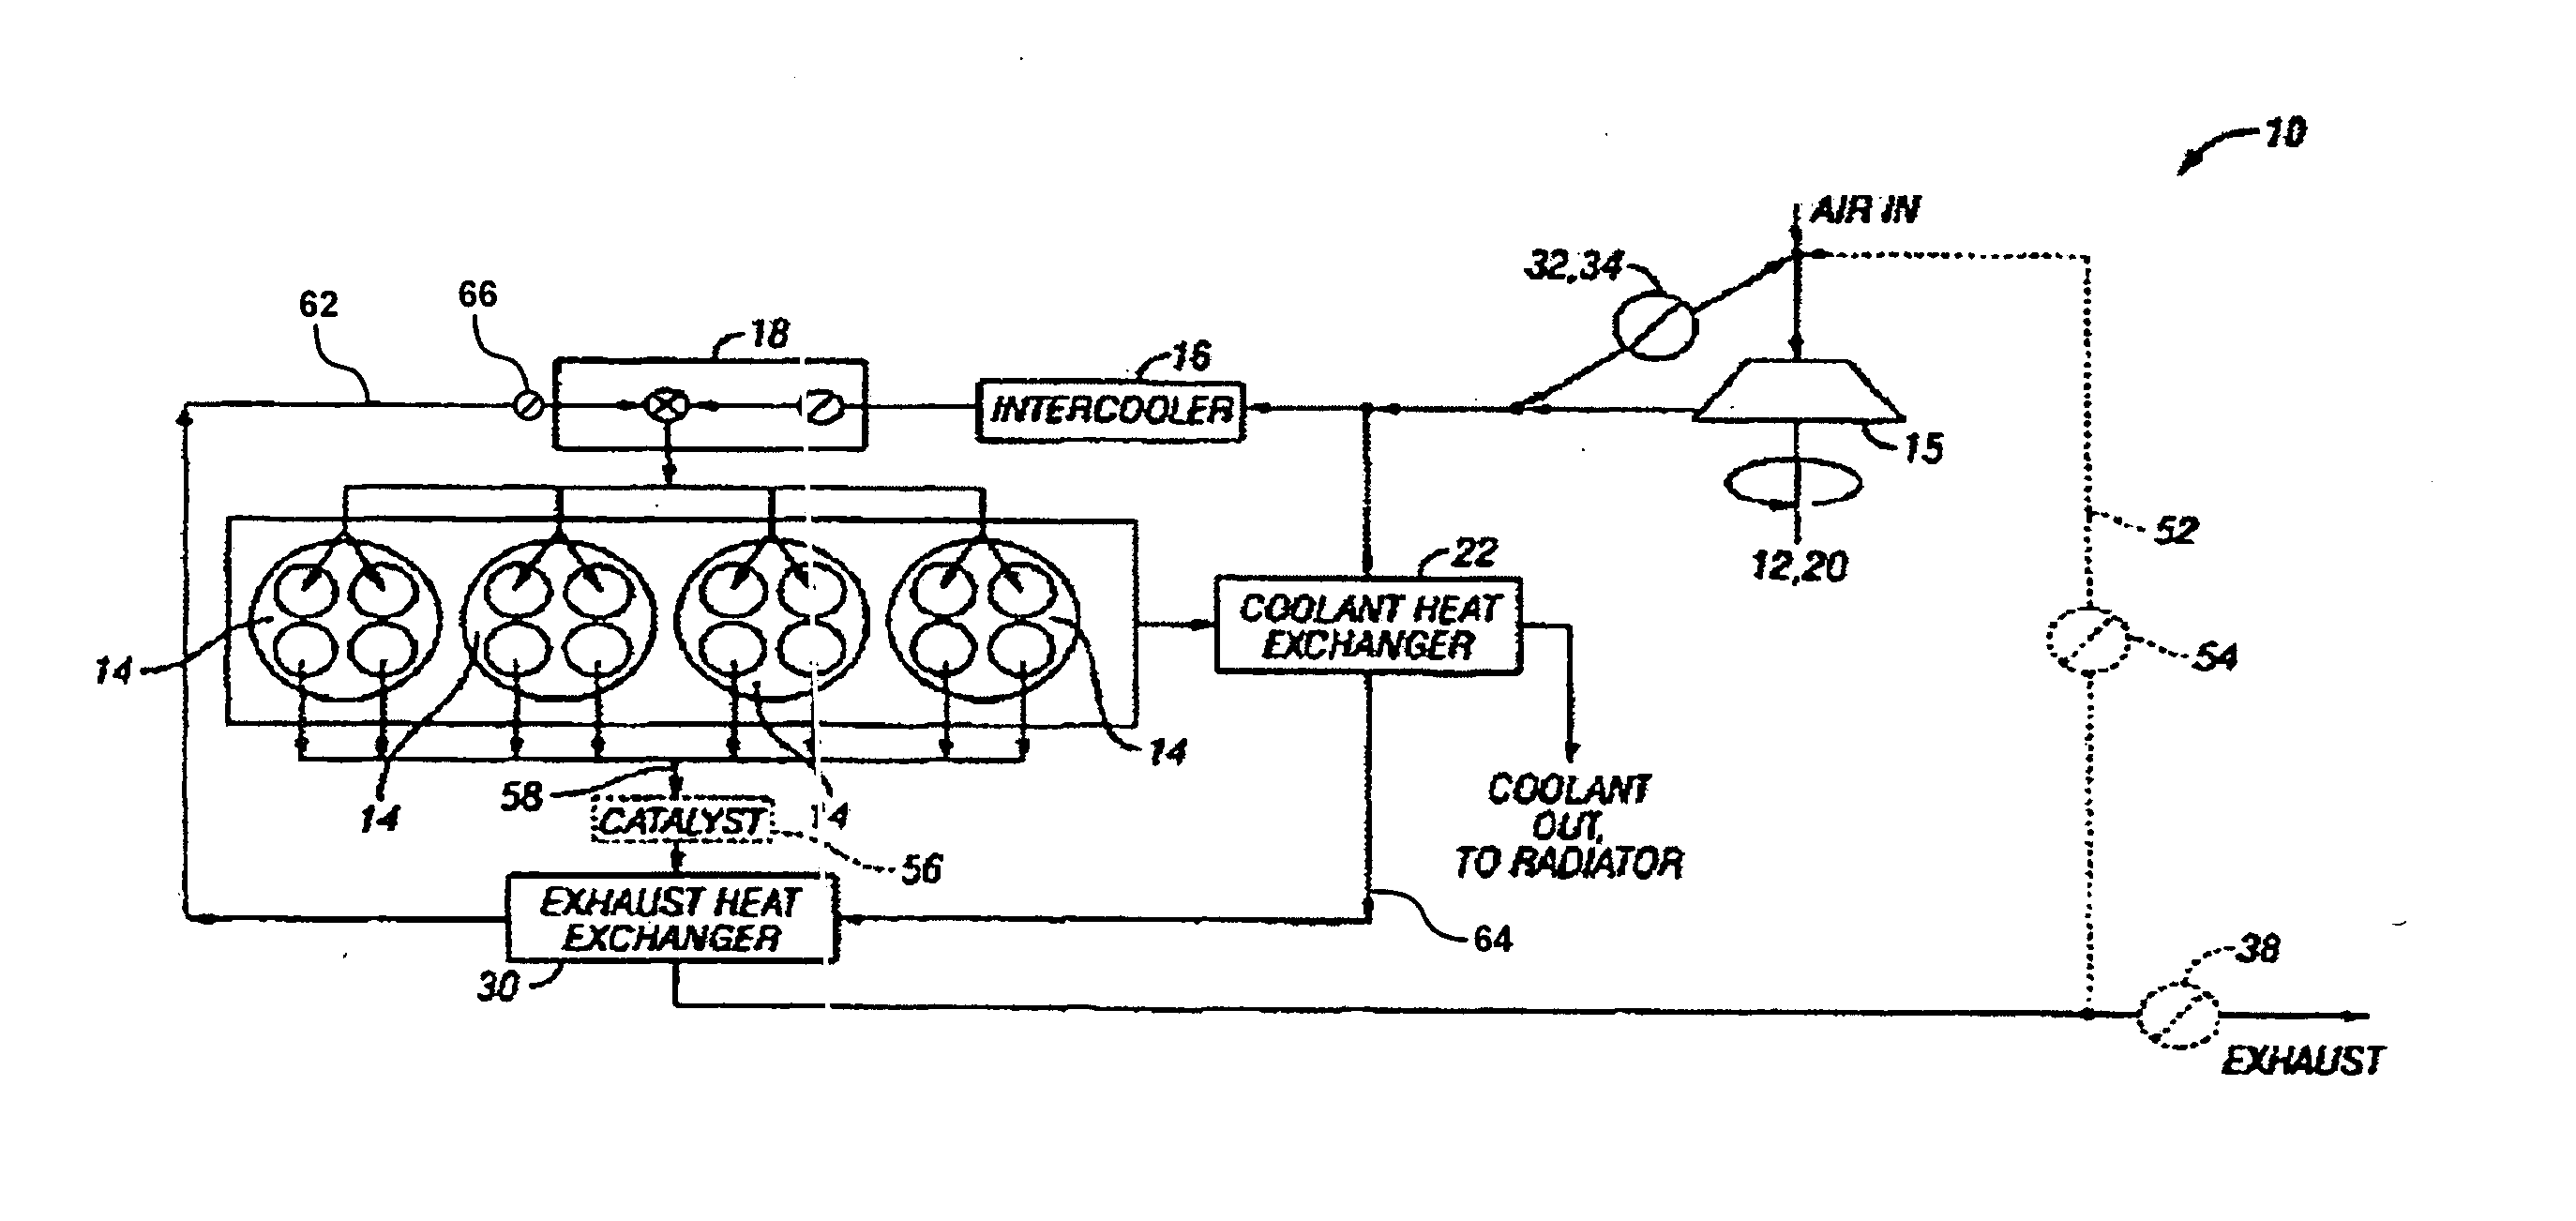 System and method for maintaining heated intake air